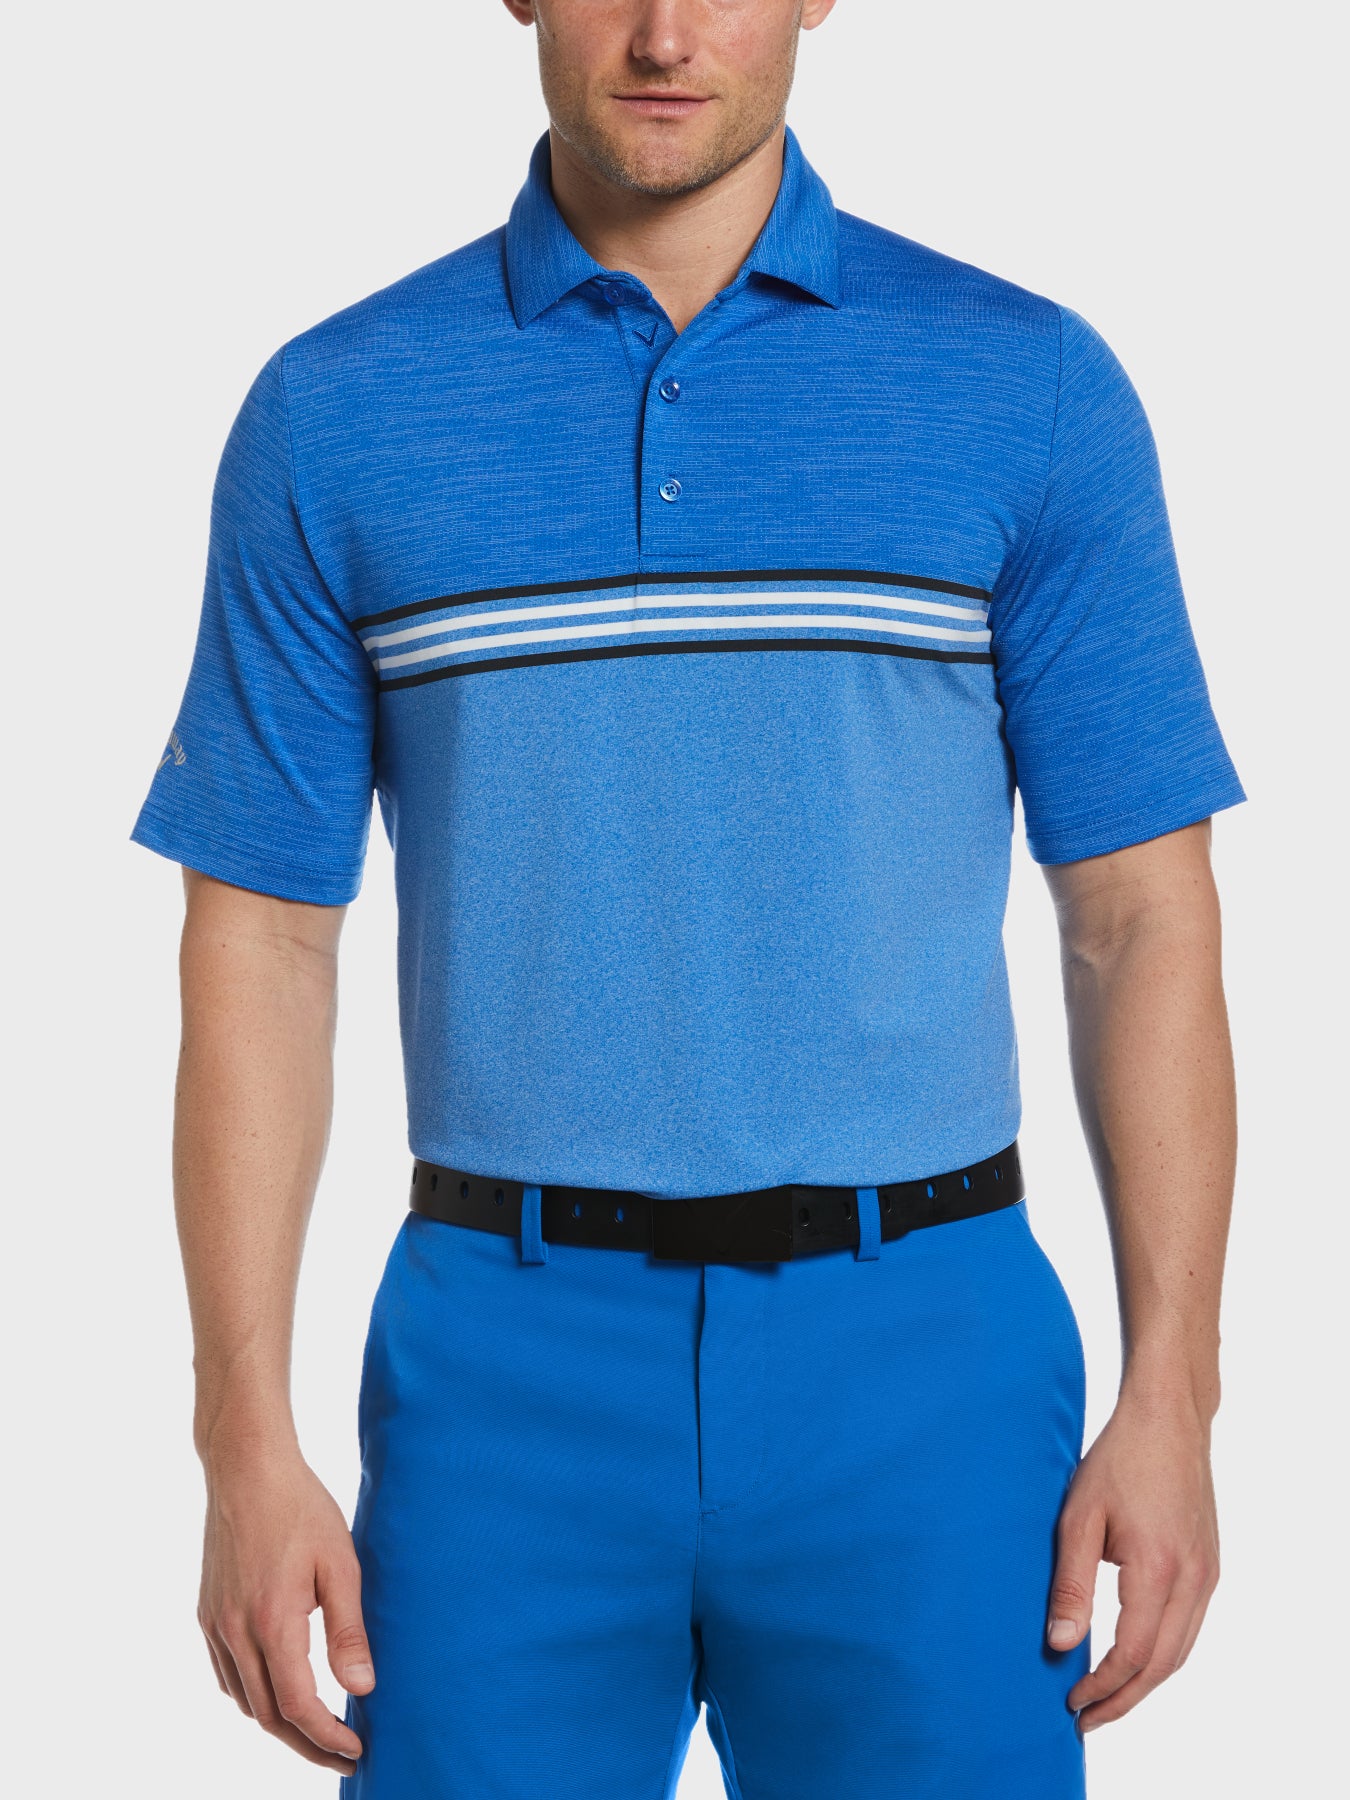 View Heathered Chest Stripe Polo In Magnetic Heather information